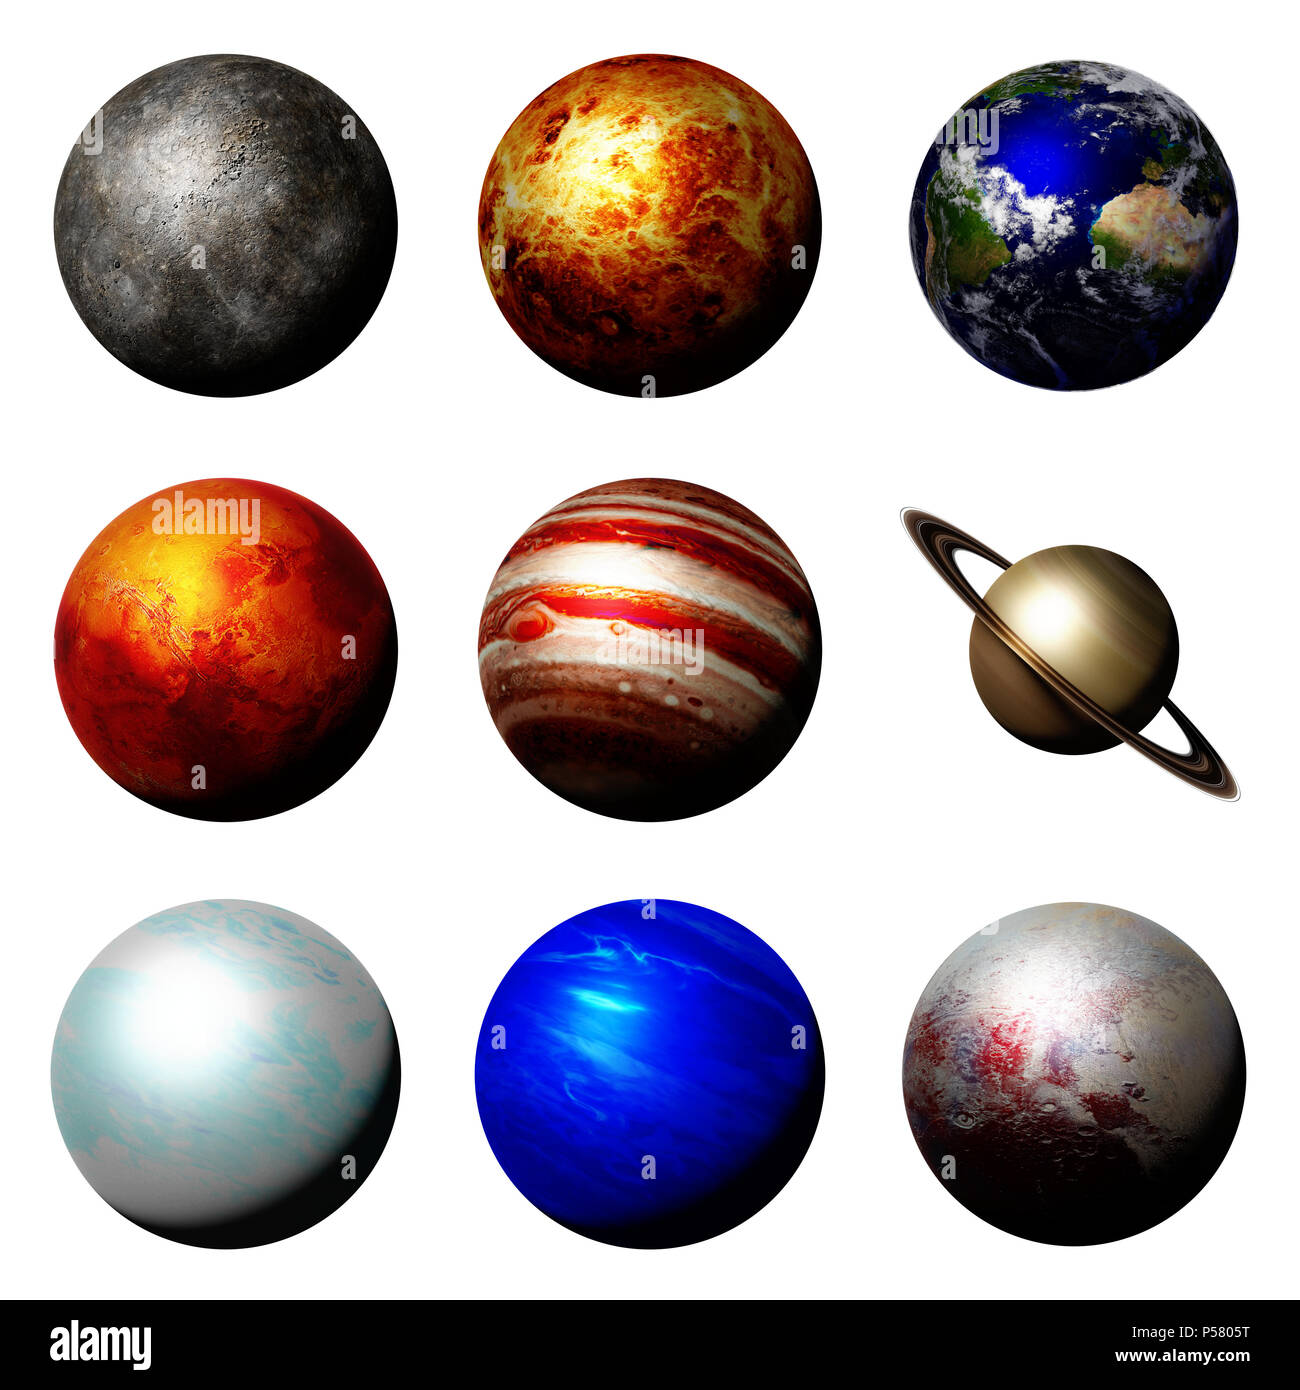 the planets of the solar system isolated on white background Stock Photo